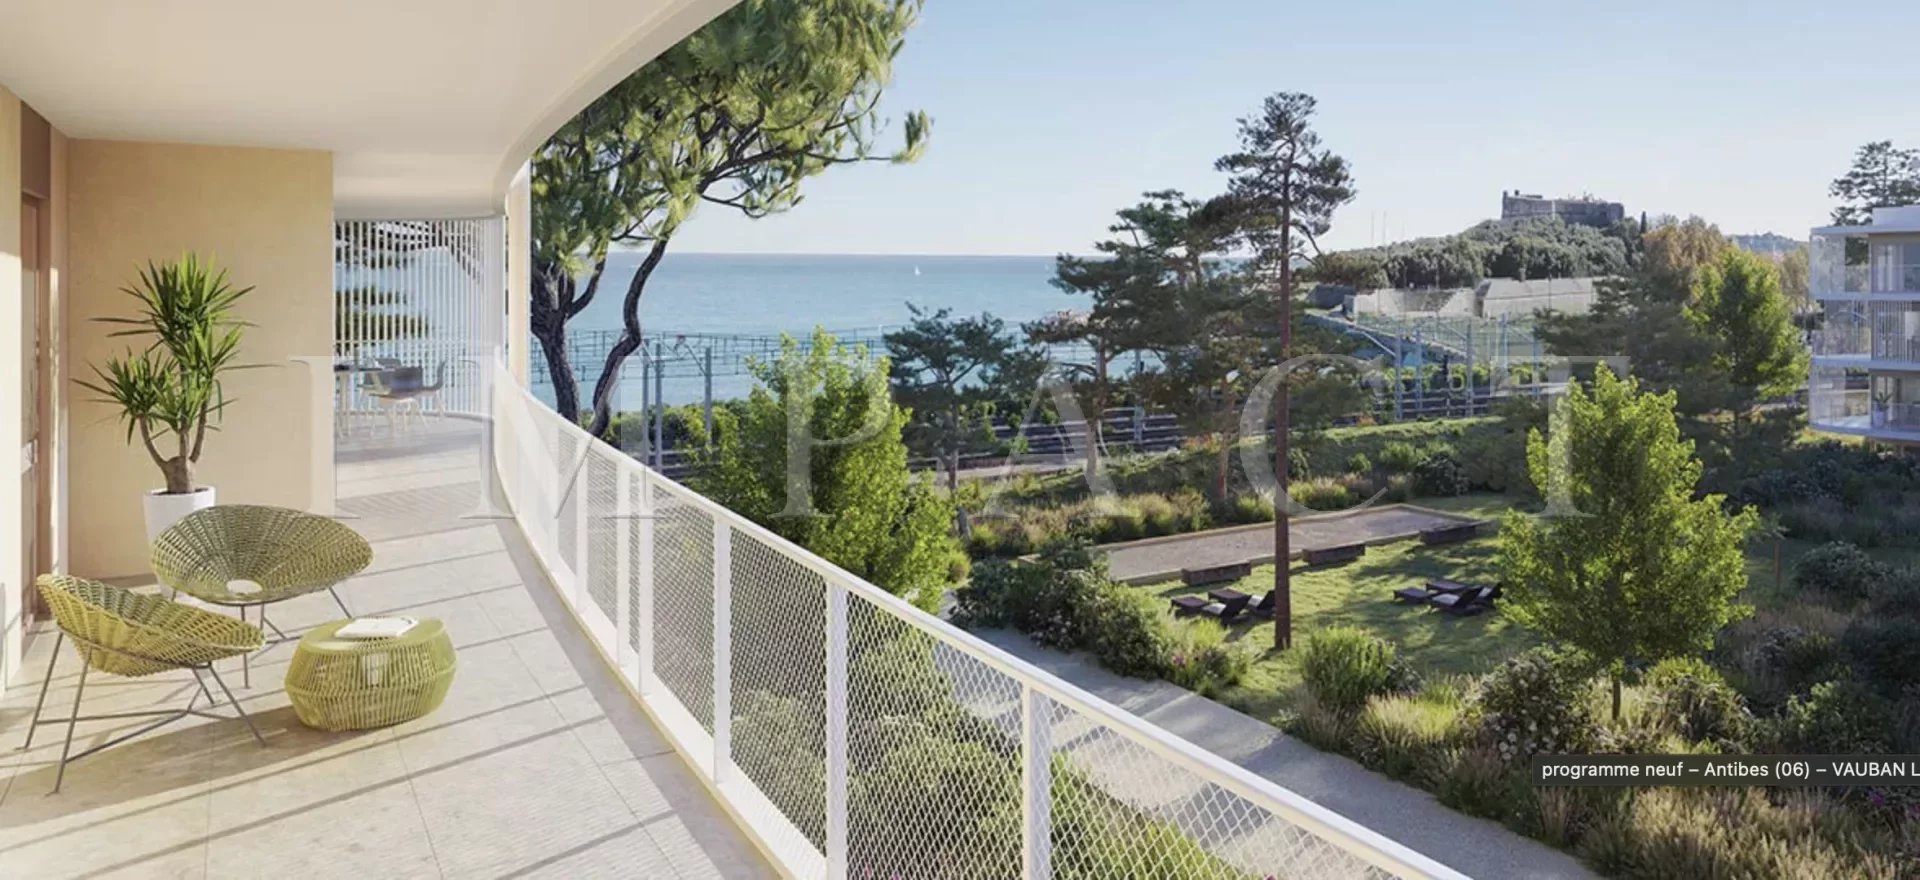 Antibes Port Vauban, 2 Rooms in a new building in Sale